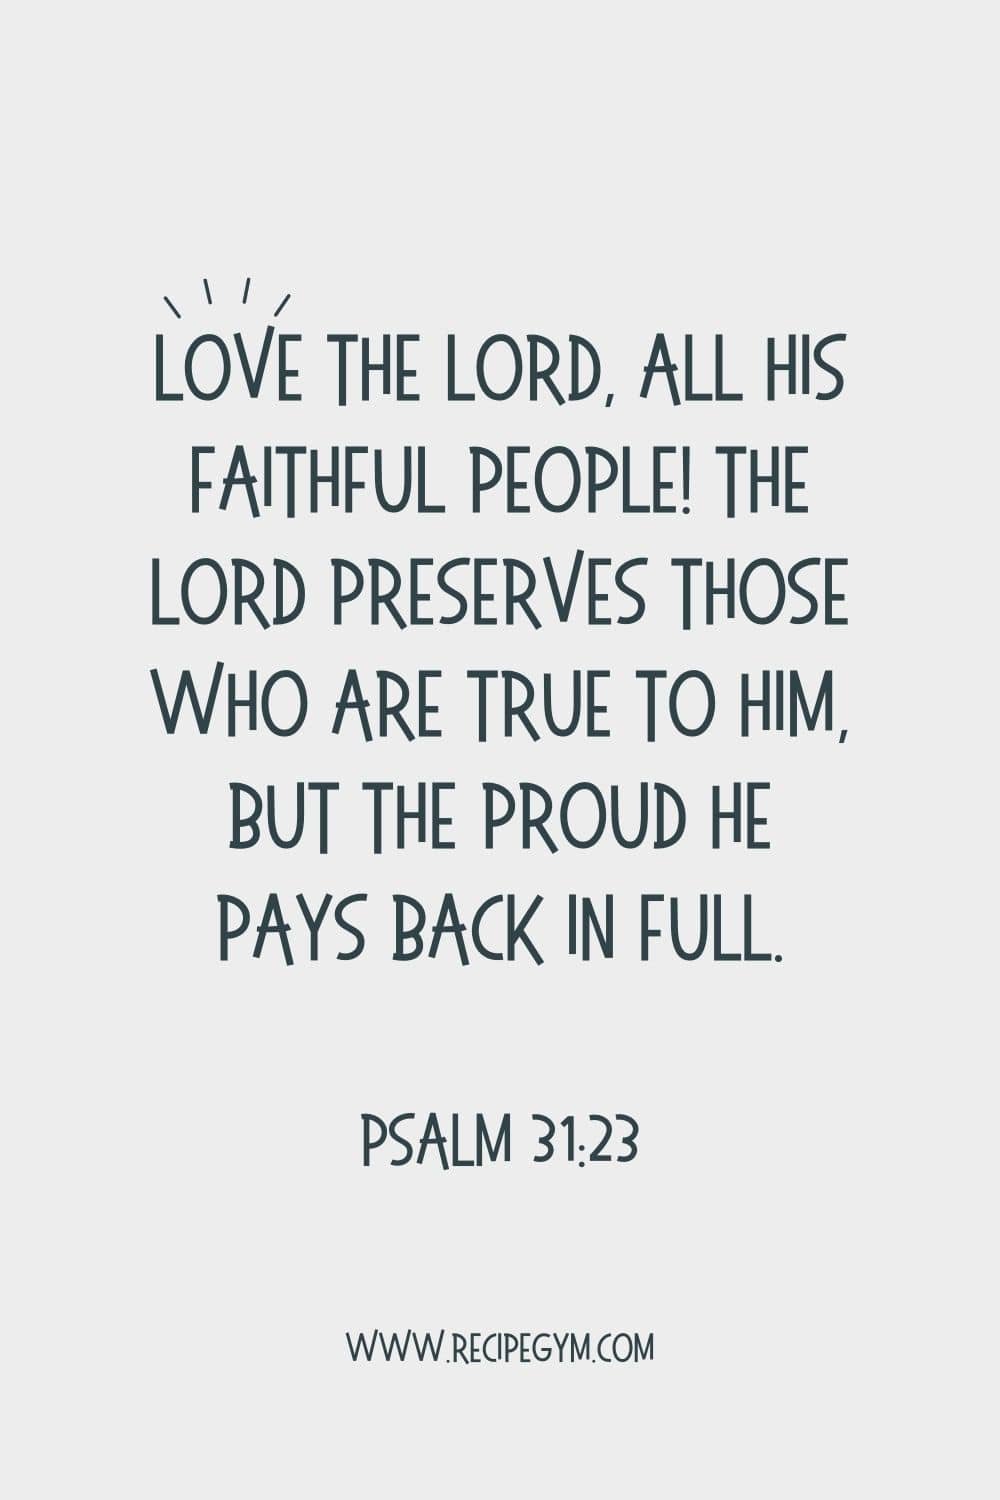 3Q Love the LORD all his faithful people The LORD preserves those who are true to him but the proud he pays back in full